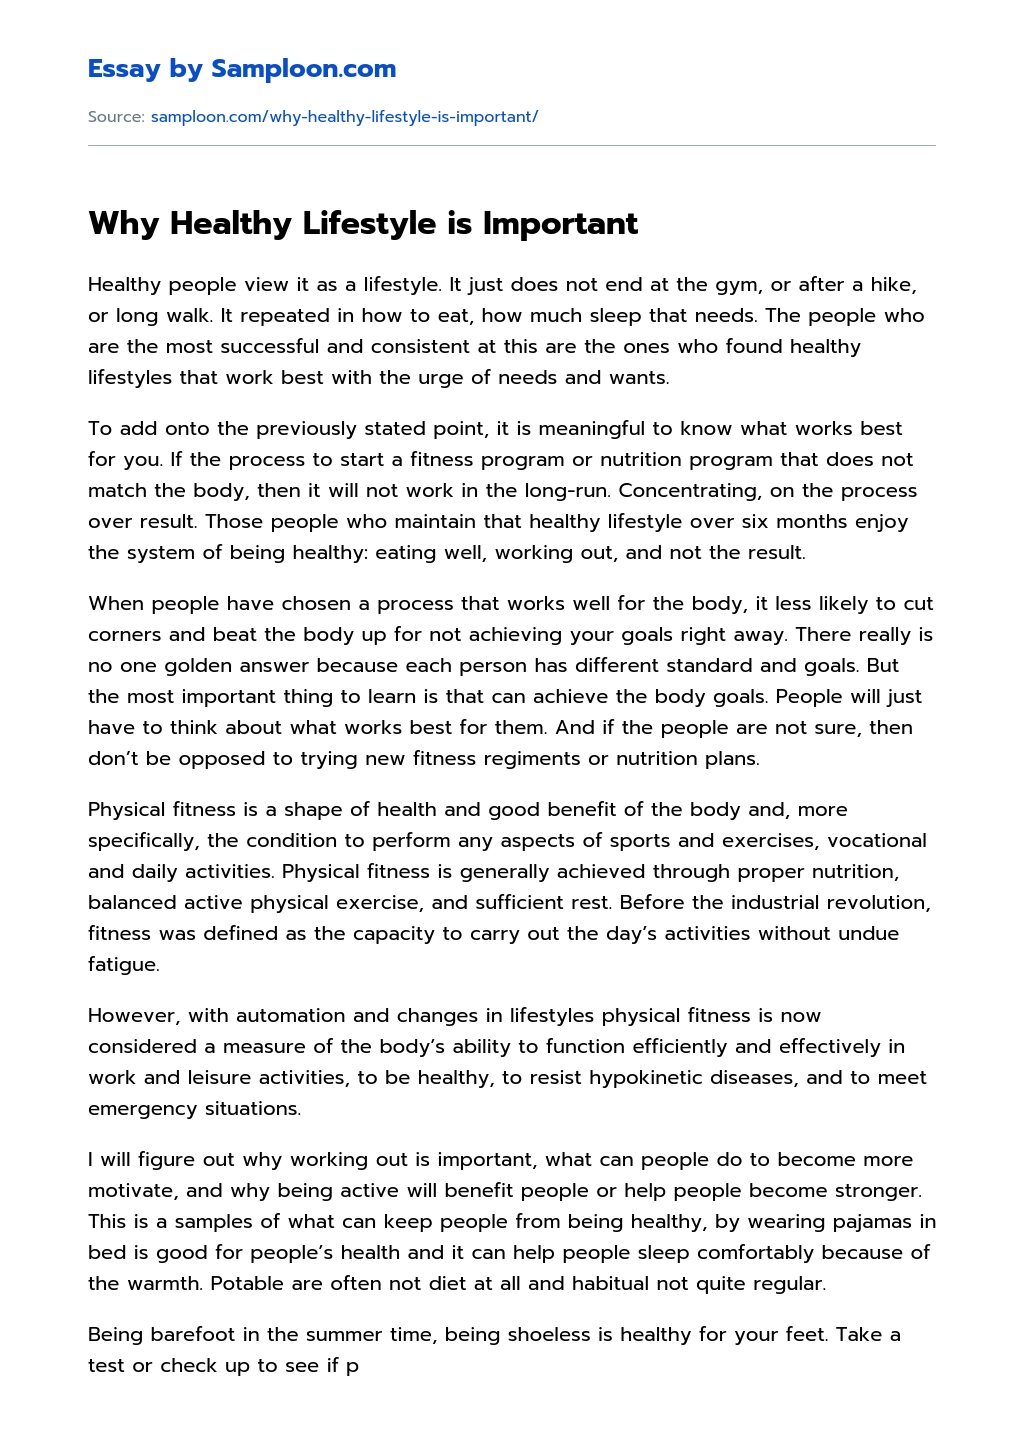 Why Healthy Lifestyle is Important essay